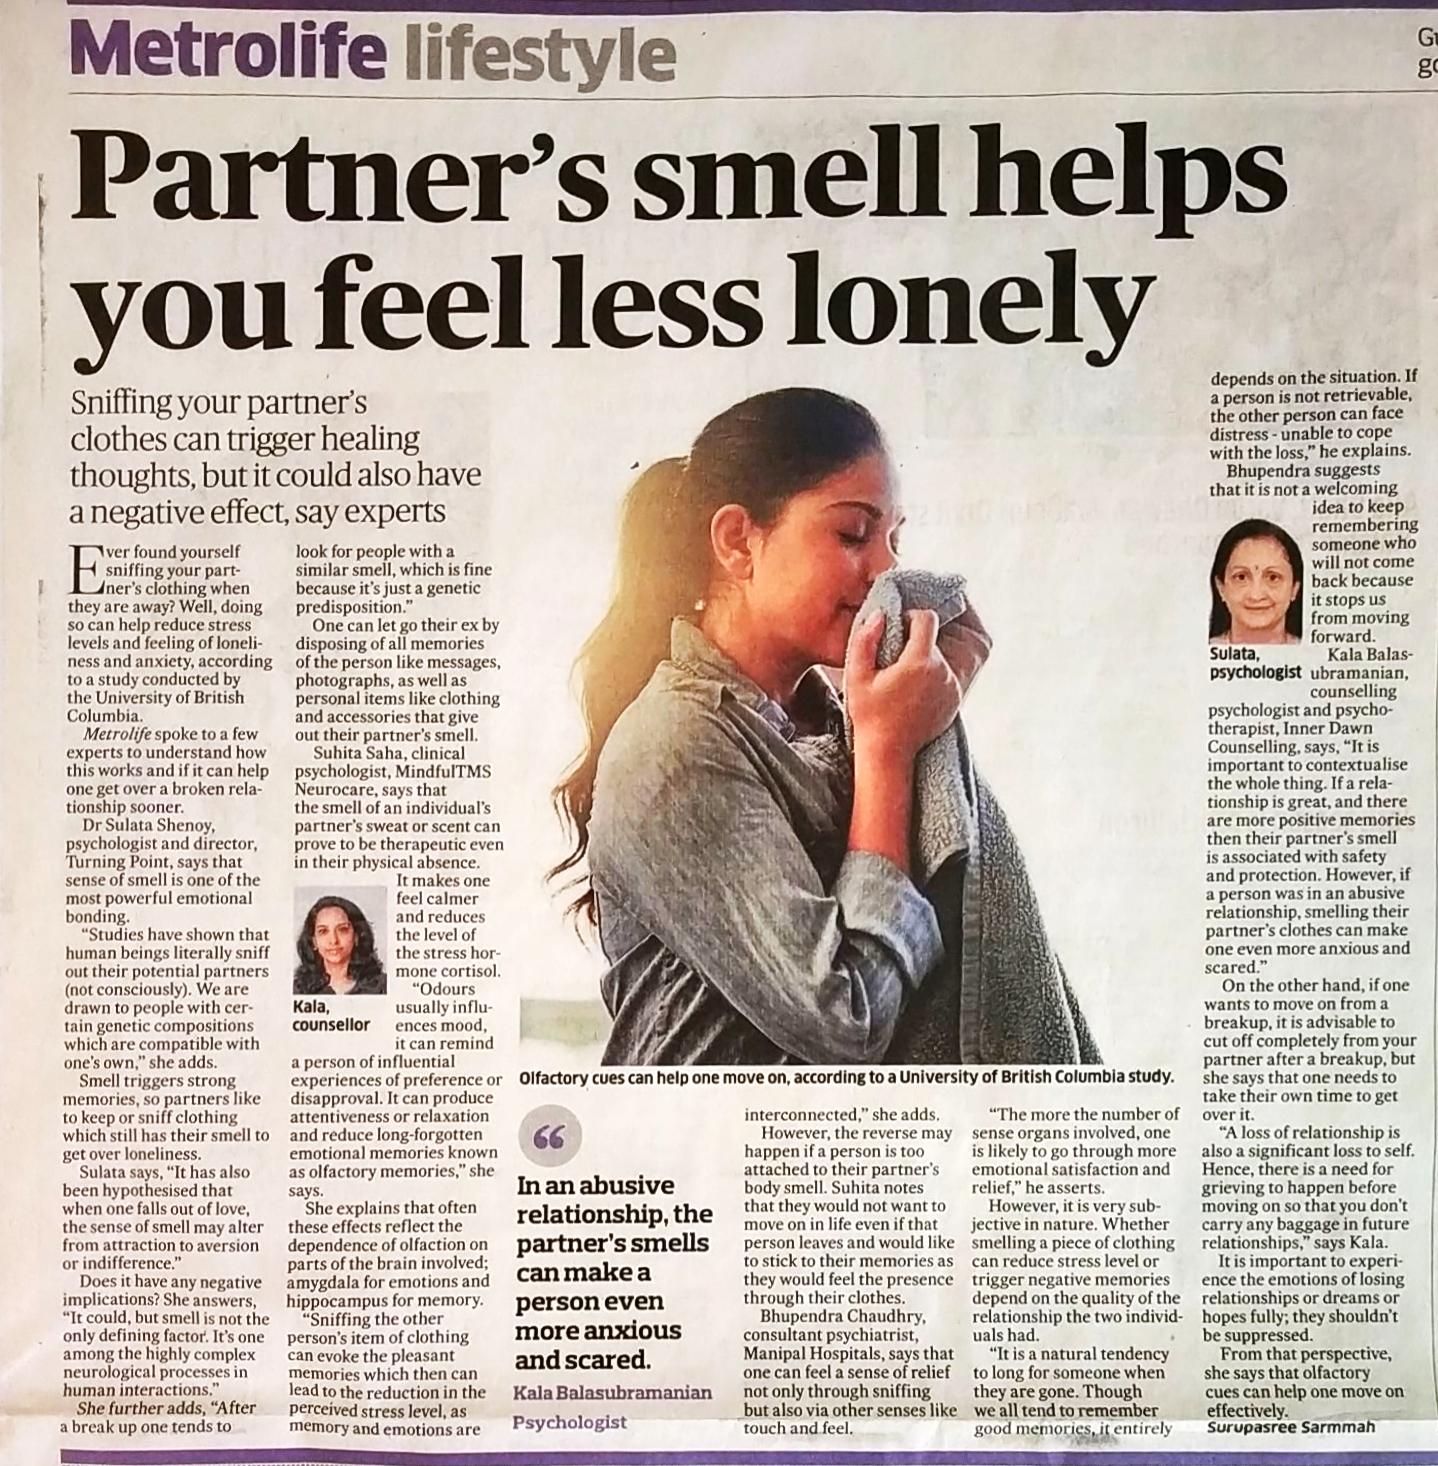 Deccan Herald-Your partners smells and effect on you- Inner Dawn Counsellor Kala Balasubramanians views featured